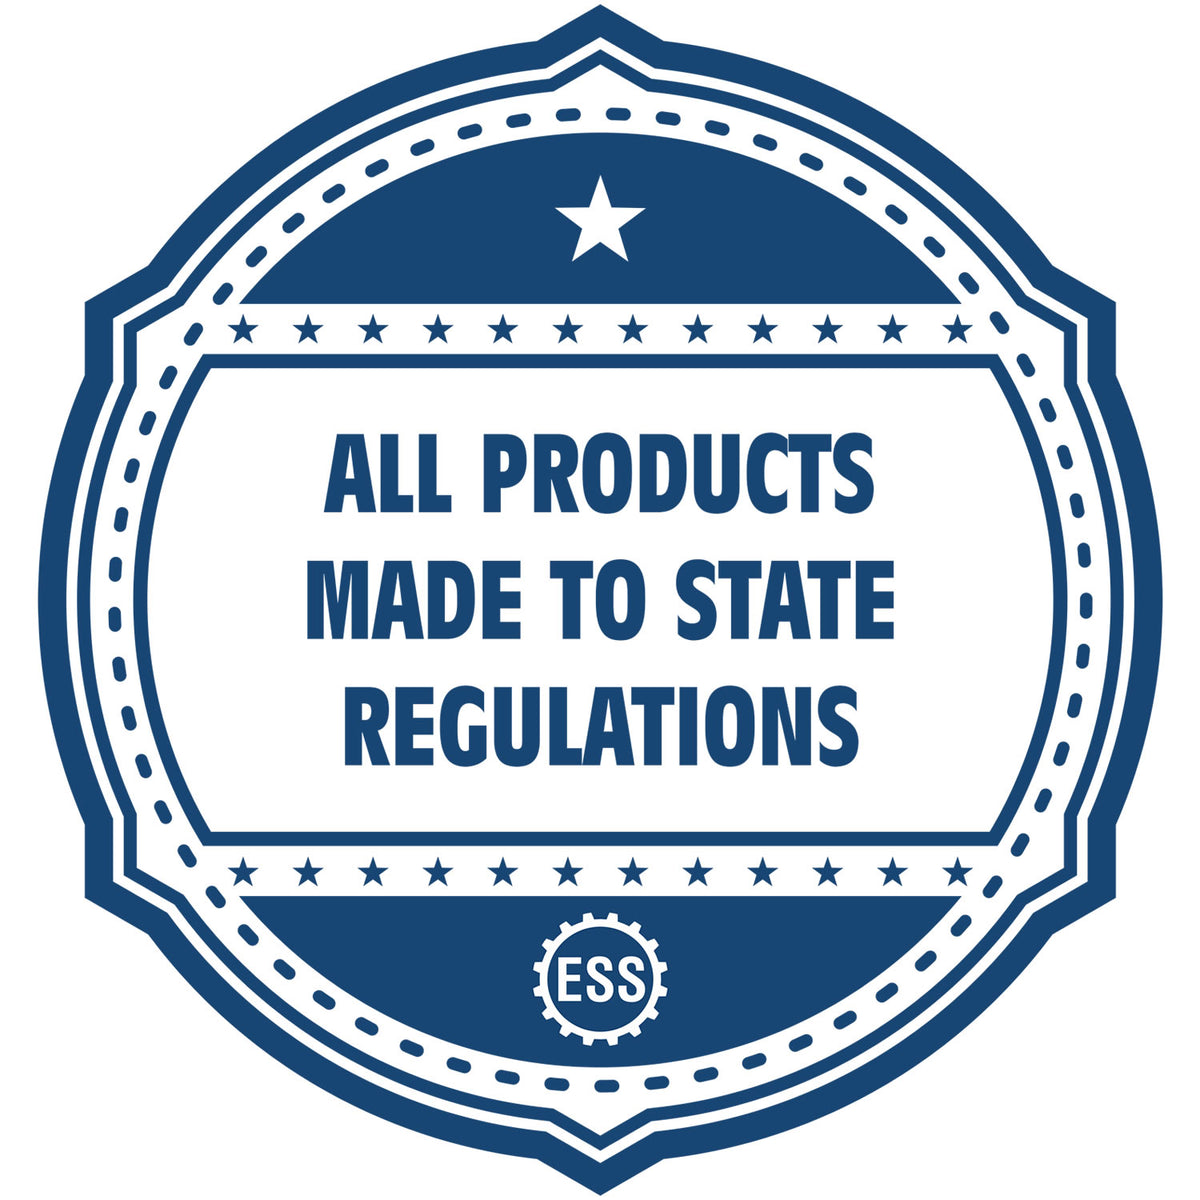 An icon or badge element for the State of Florida Architectural Seal Embosser showing that this product is made in compliance with state regulations.